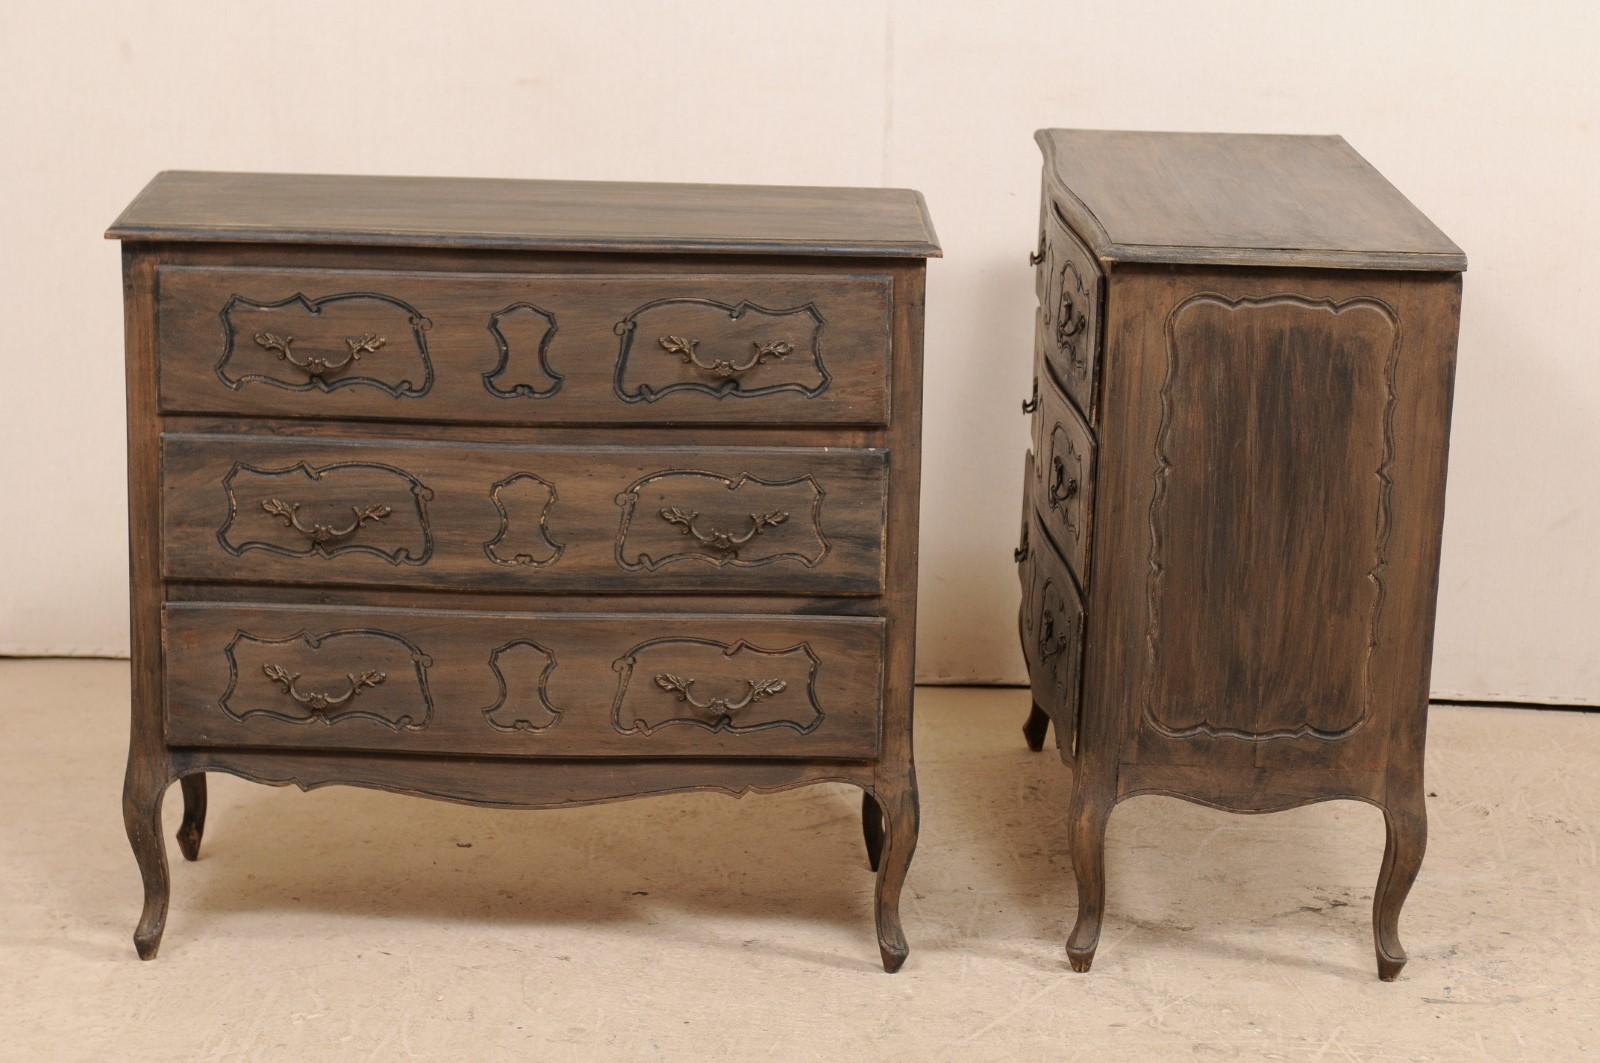 A pair of American three-drawer chests from the mid-20th century. This pair of French style painted wood chests each feature a softly bowed front, three full length drawers, each with molded panels with carved cartouches at center, decoratively